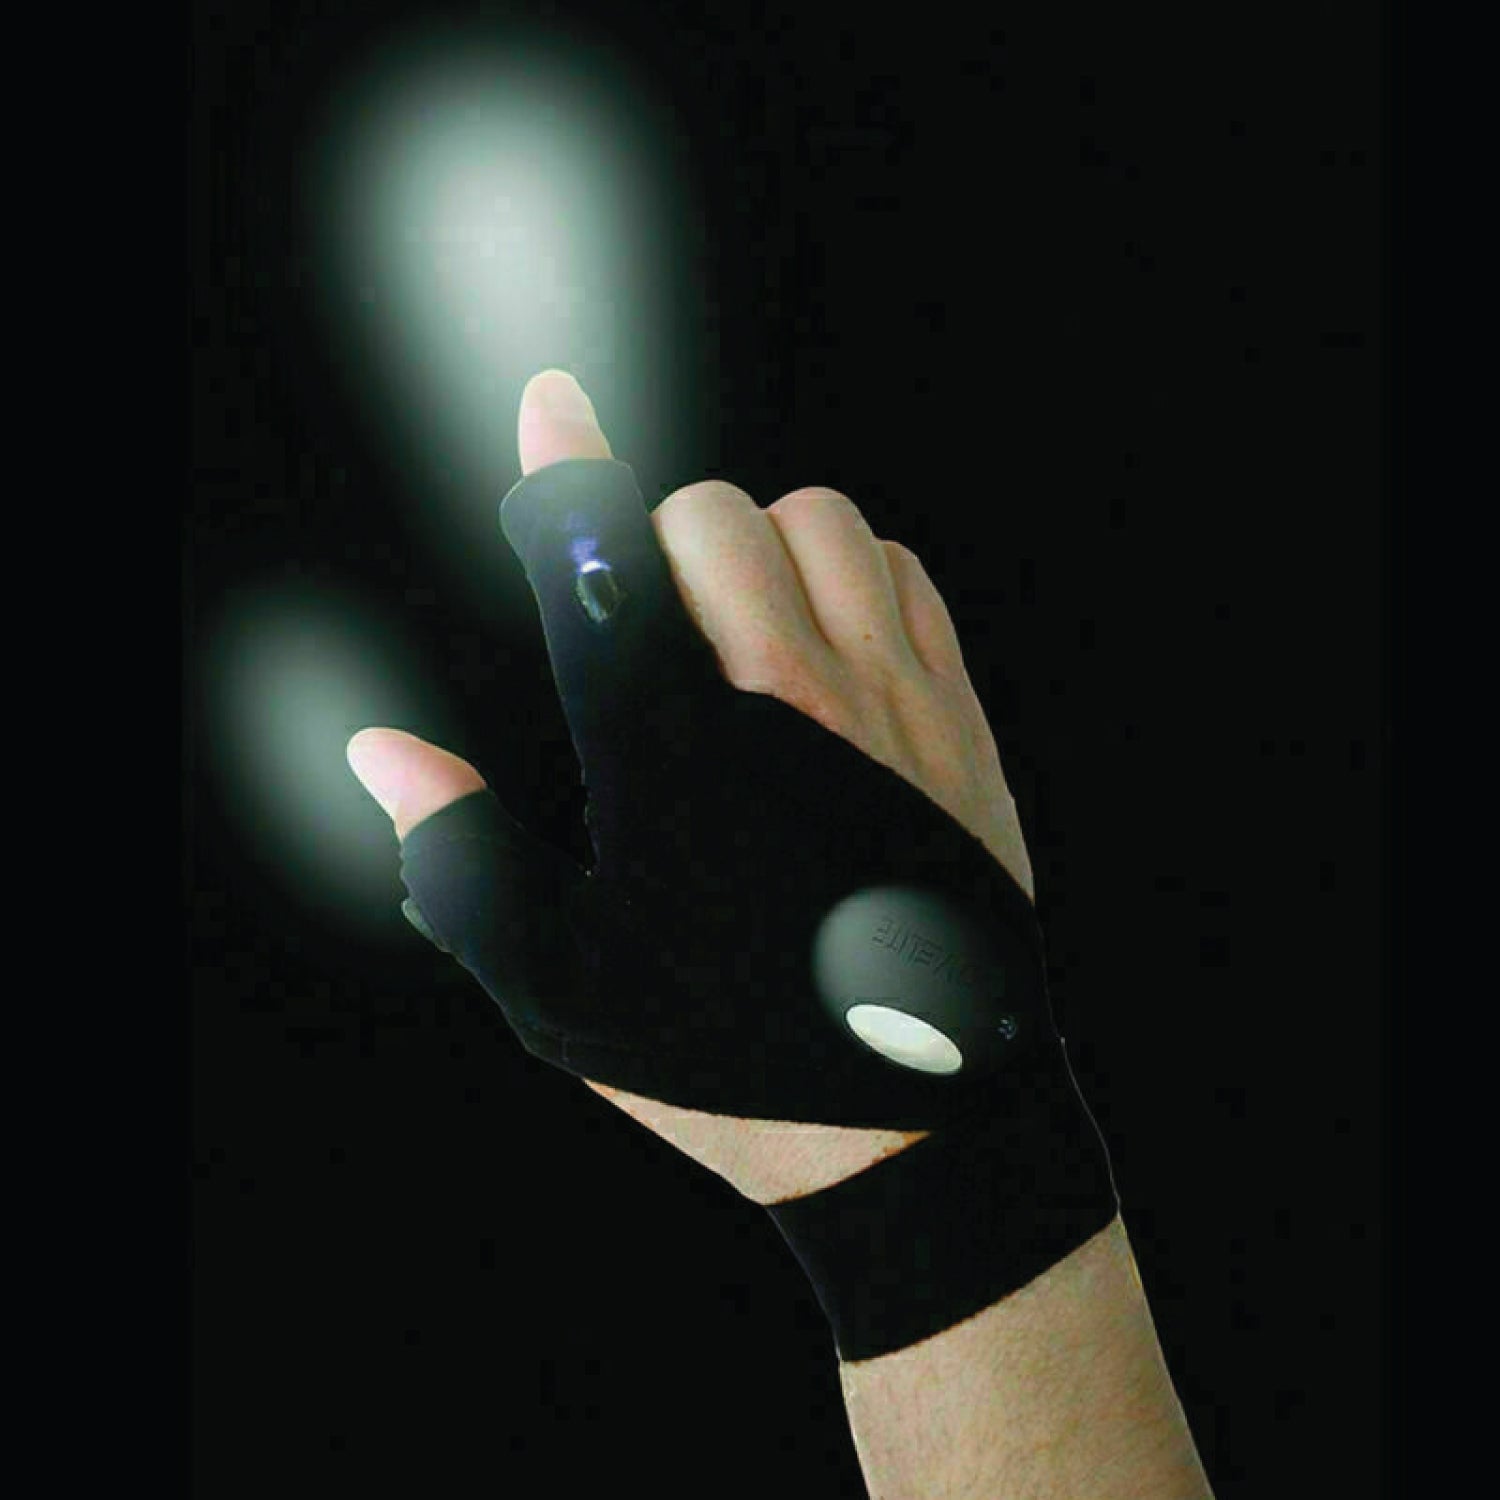 gloves with lights on fingers shark tank